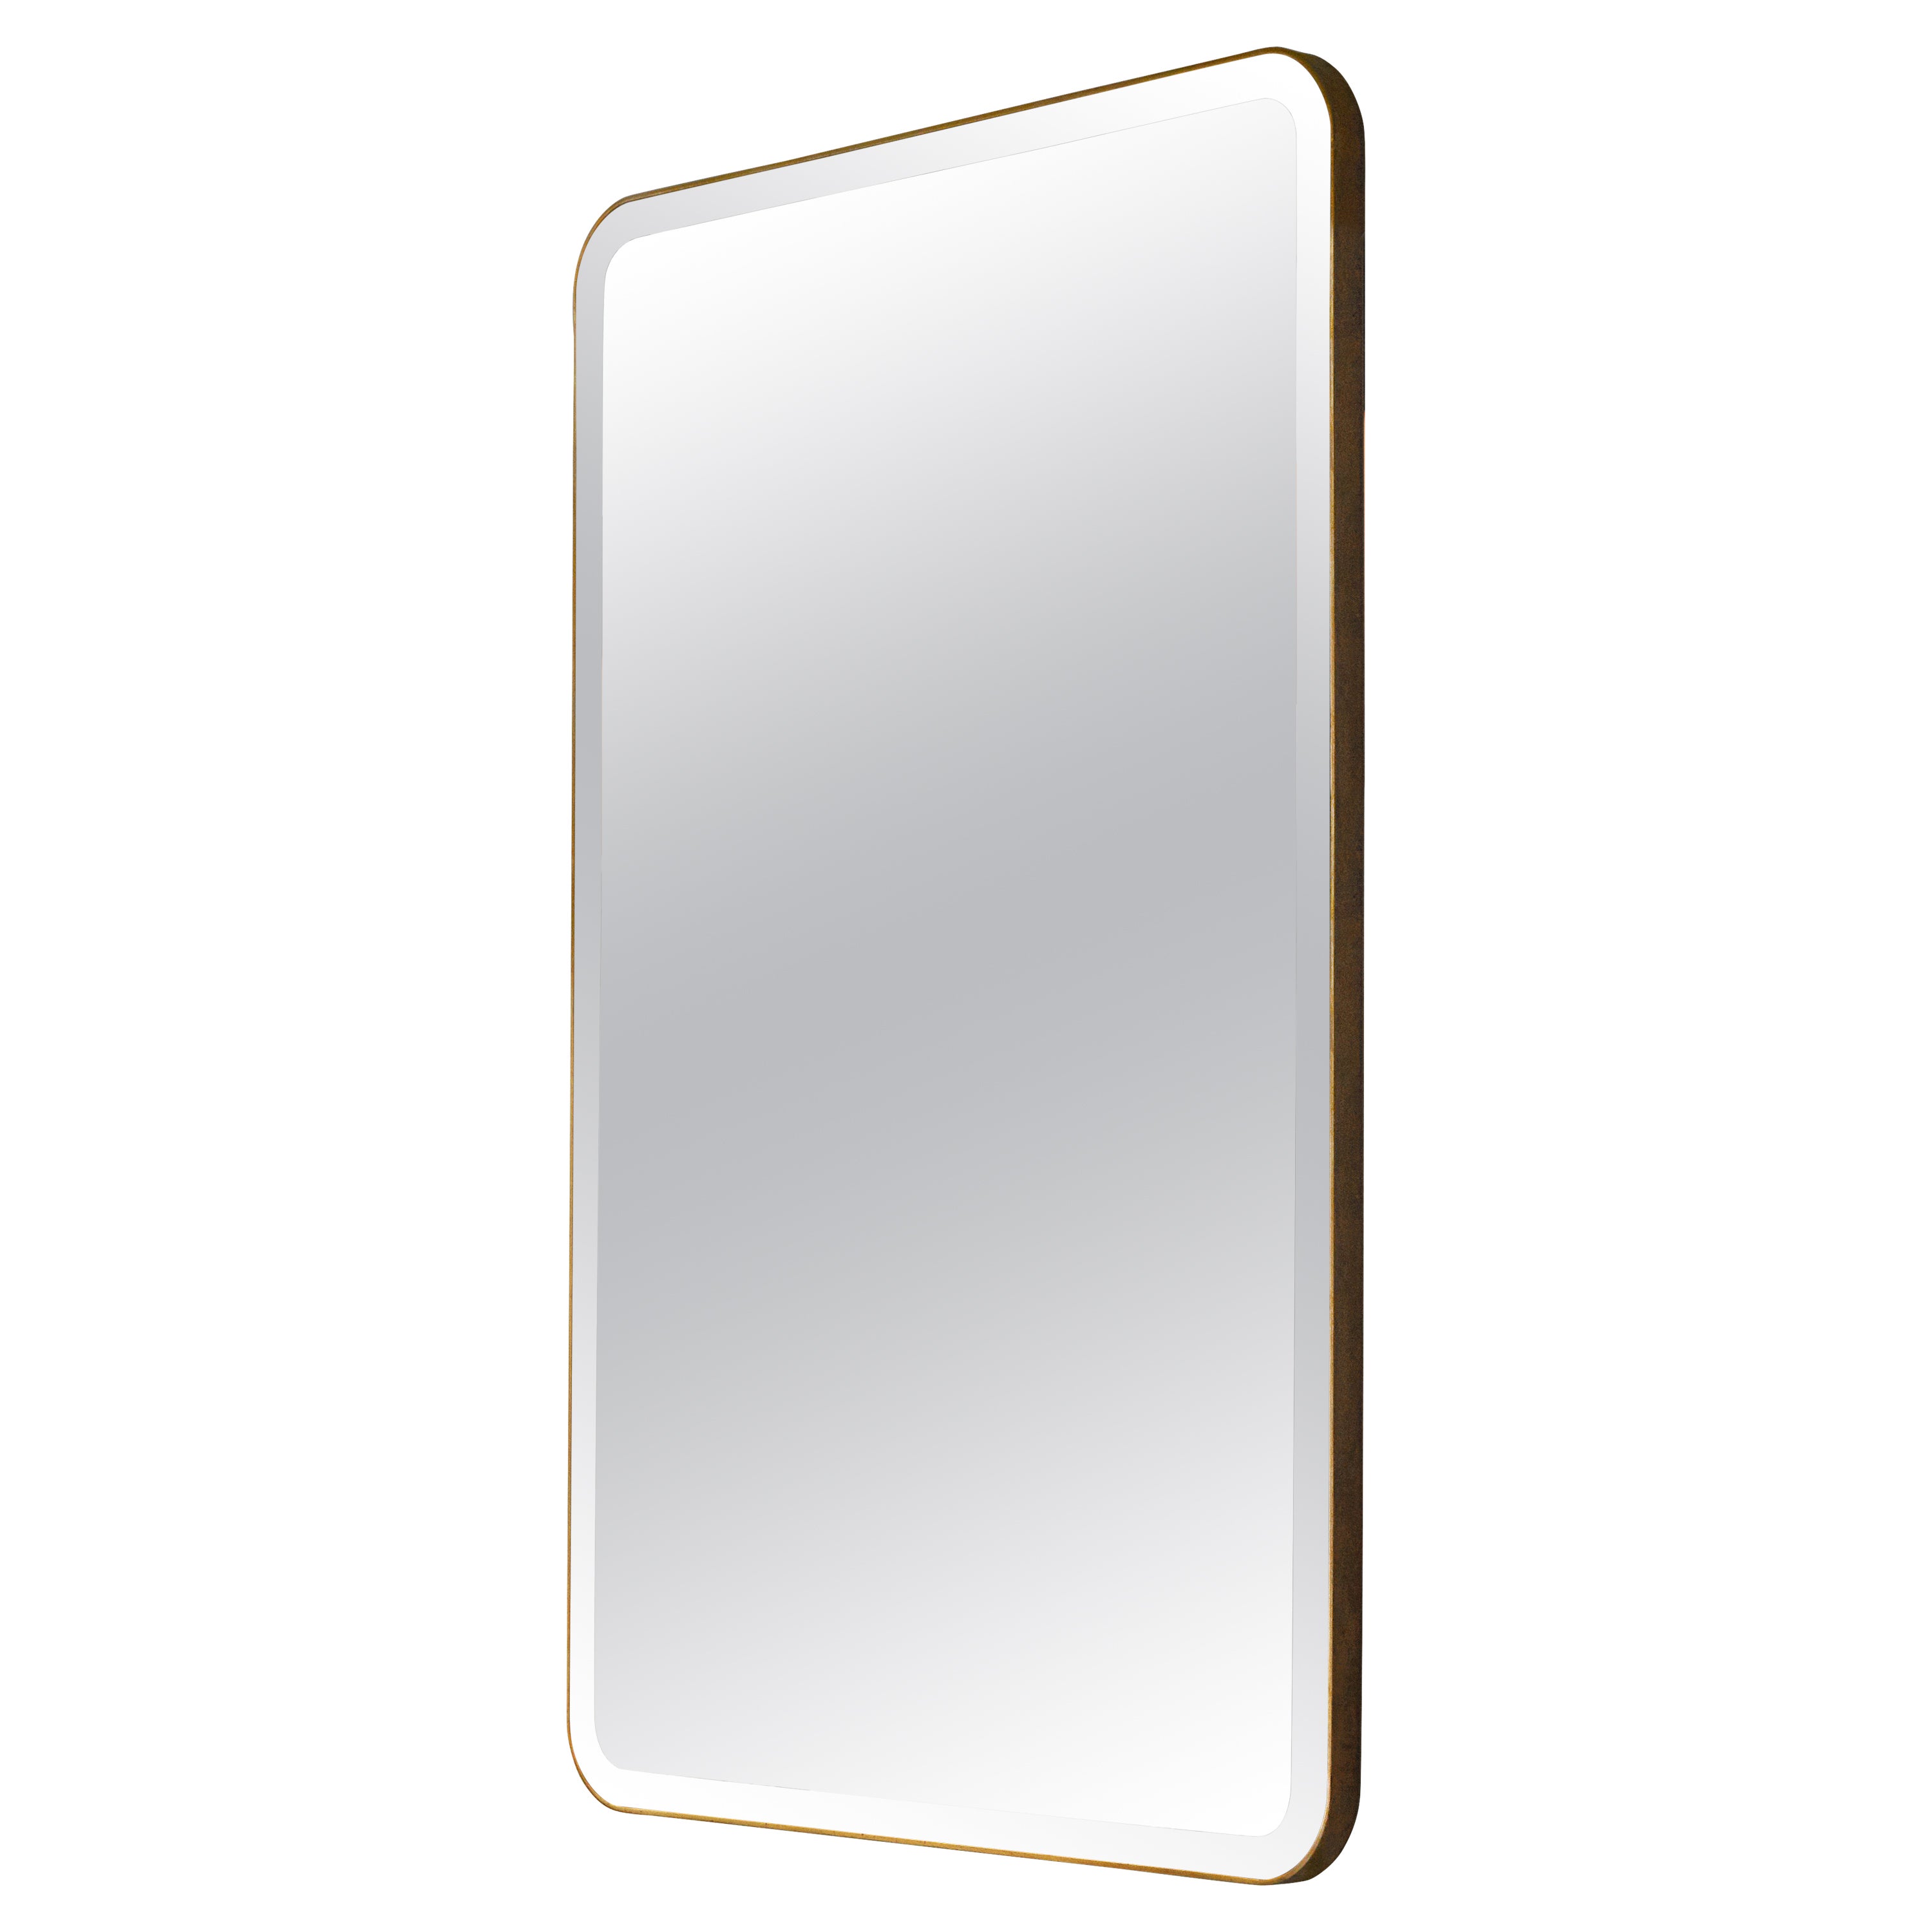 Sofie Mirror in Bevelled Glass and Brass — Large